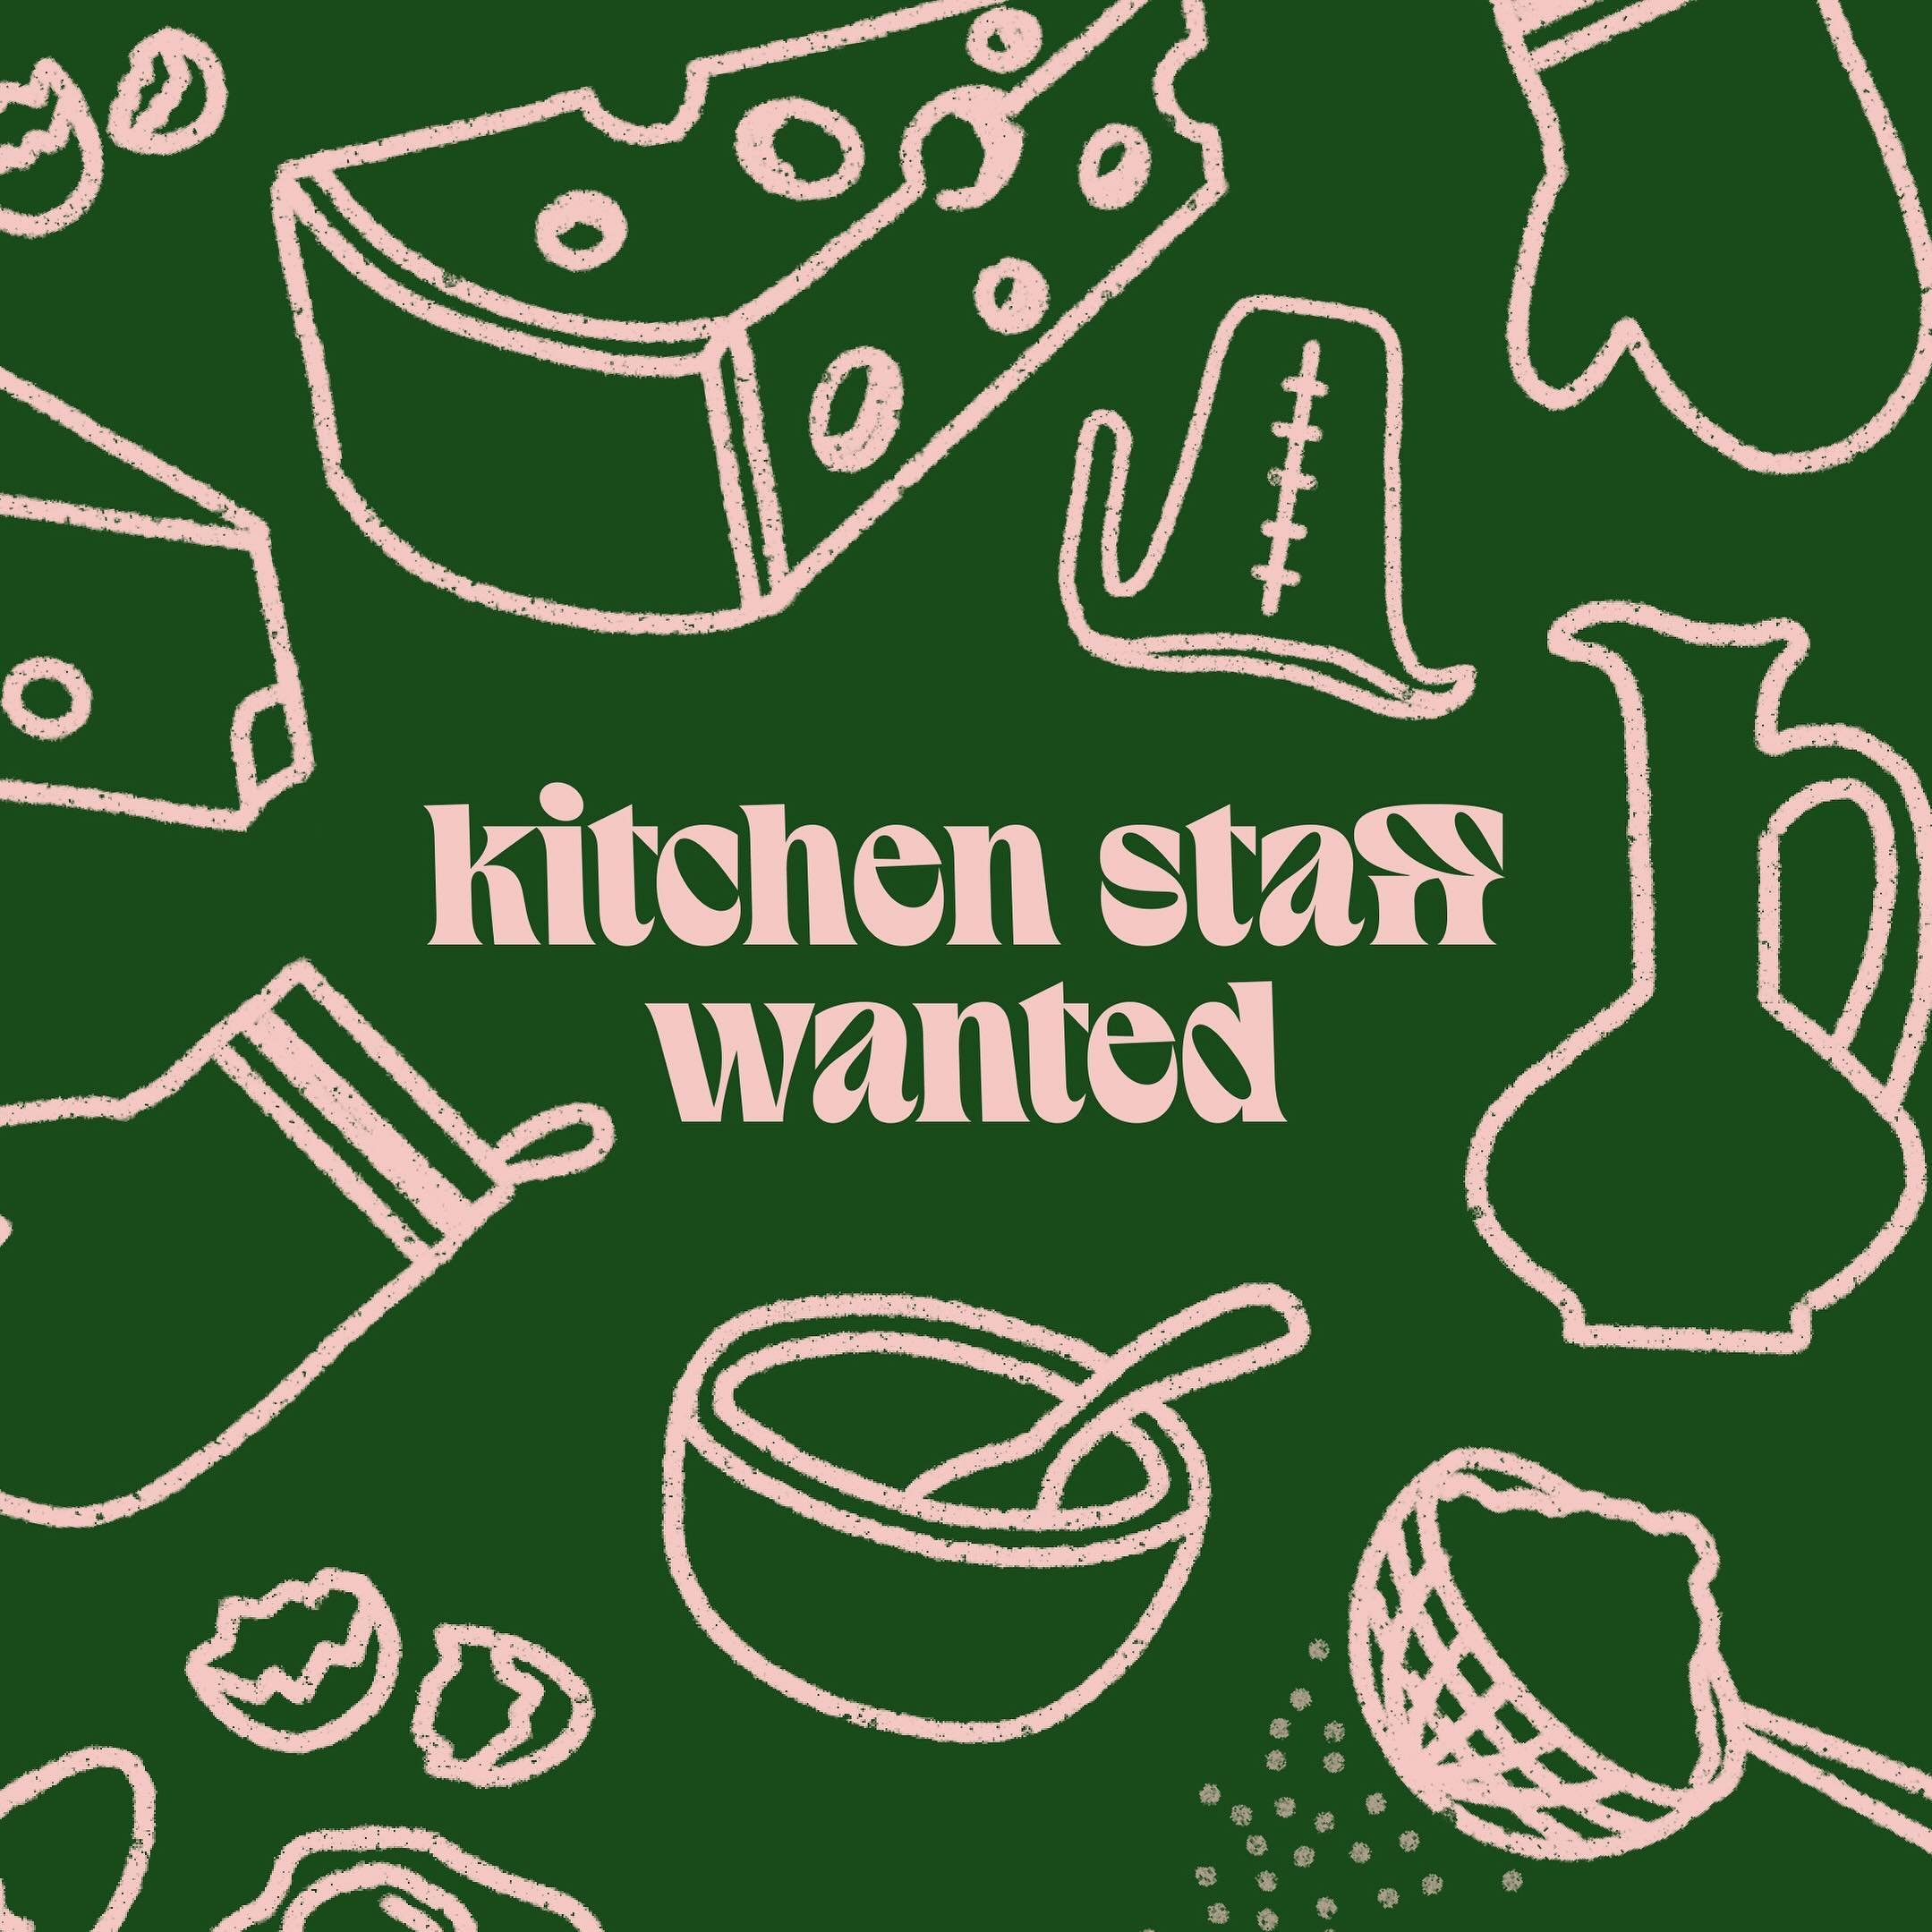 We are looking for kitchen staff - Pizza Chefs, Prep Chefs &amp; KPs. Must be flexible to work am / pm and weekends. No dm&rsquo;s or surprise visits please. Send your CV to Kitchen@manipizza.ie 📧🙏🧑&zwj;🍳👨&zwj;🍳